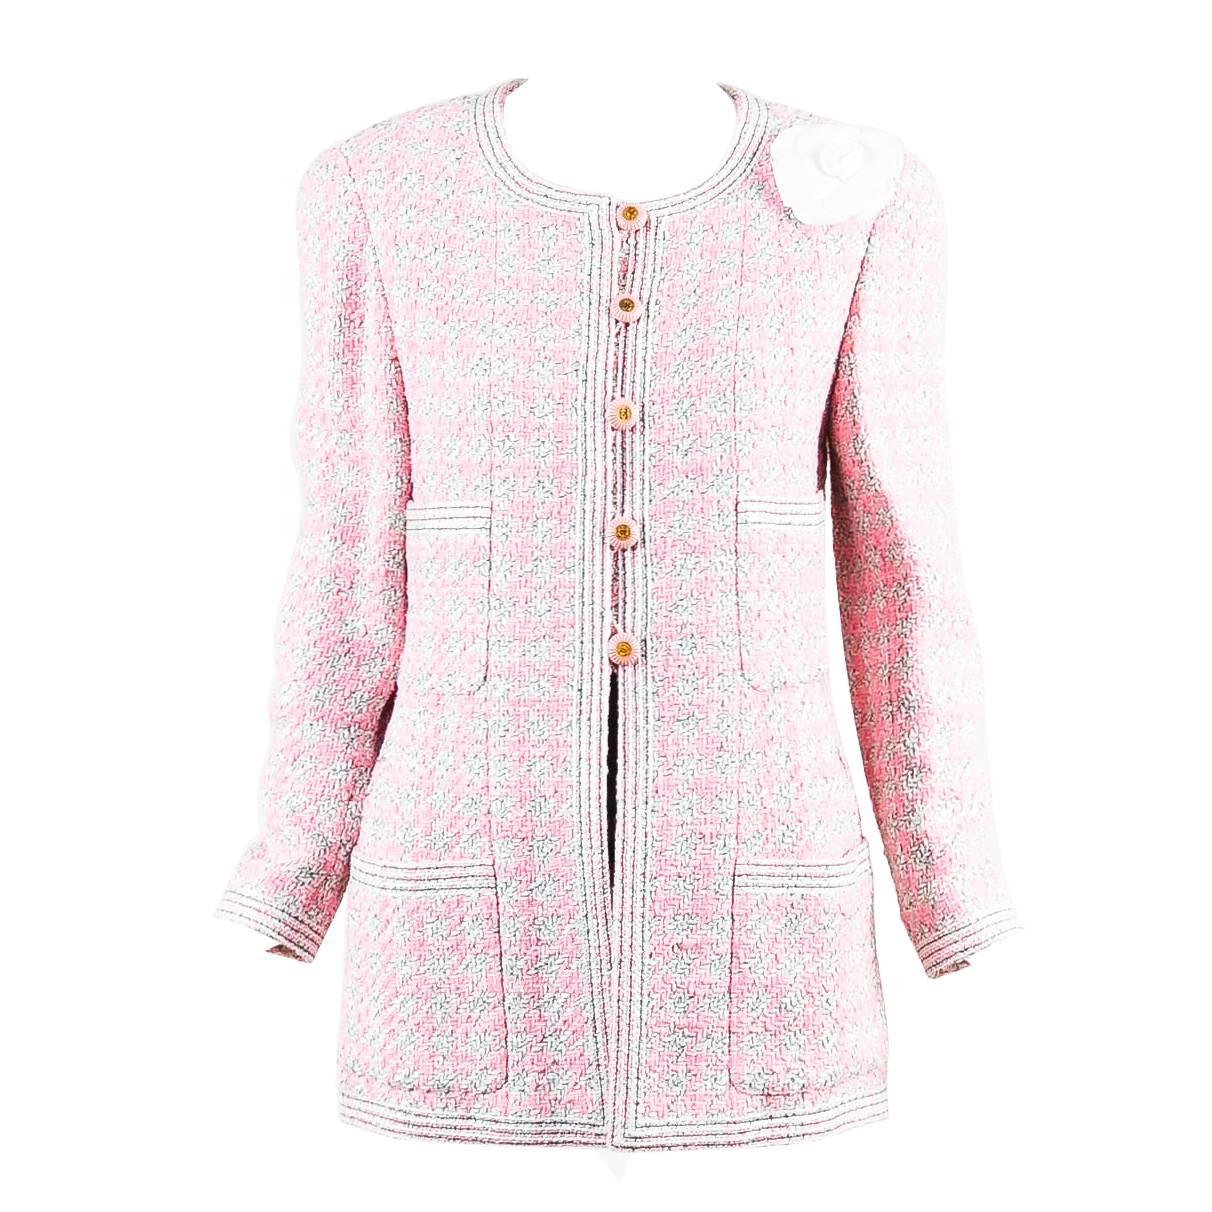 Vintage Chanel Boutique 93P Pink & White Tweed Camellia Pinned Jacket SZ 42 For Sale